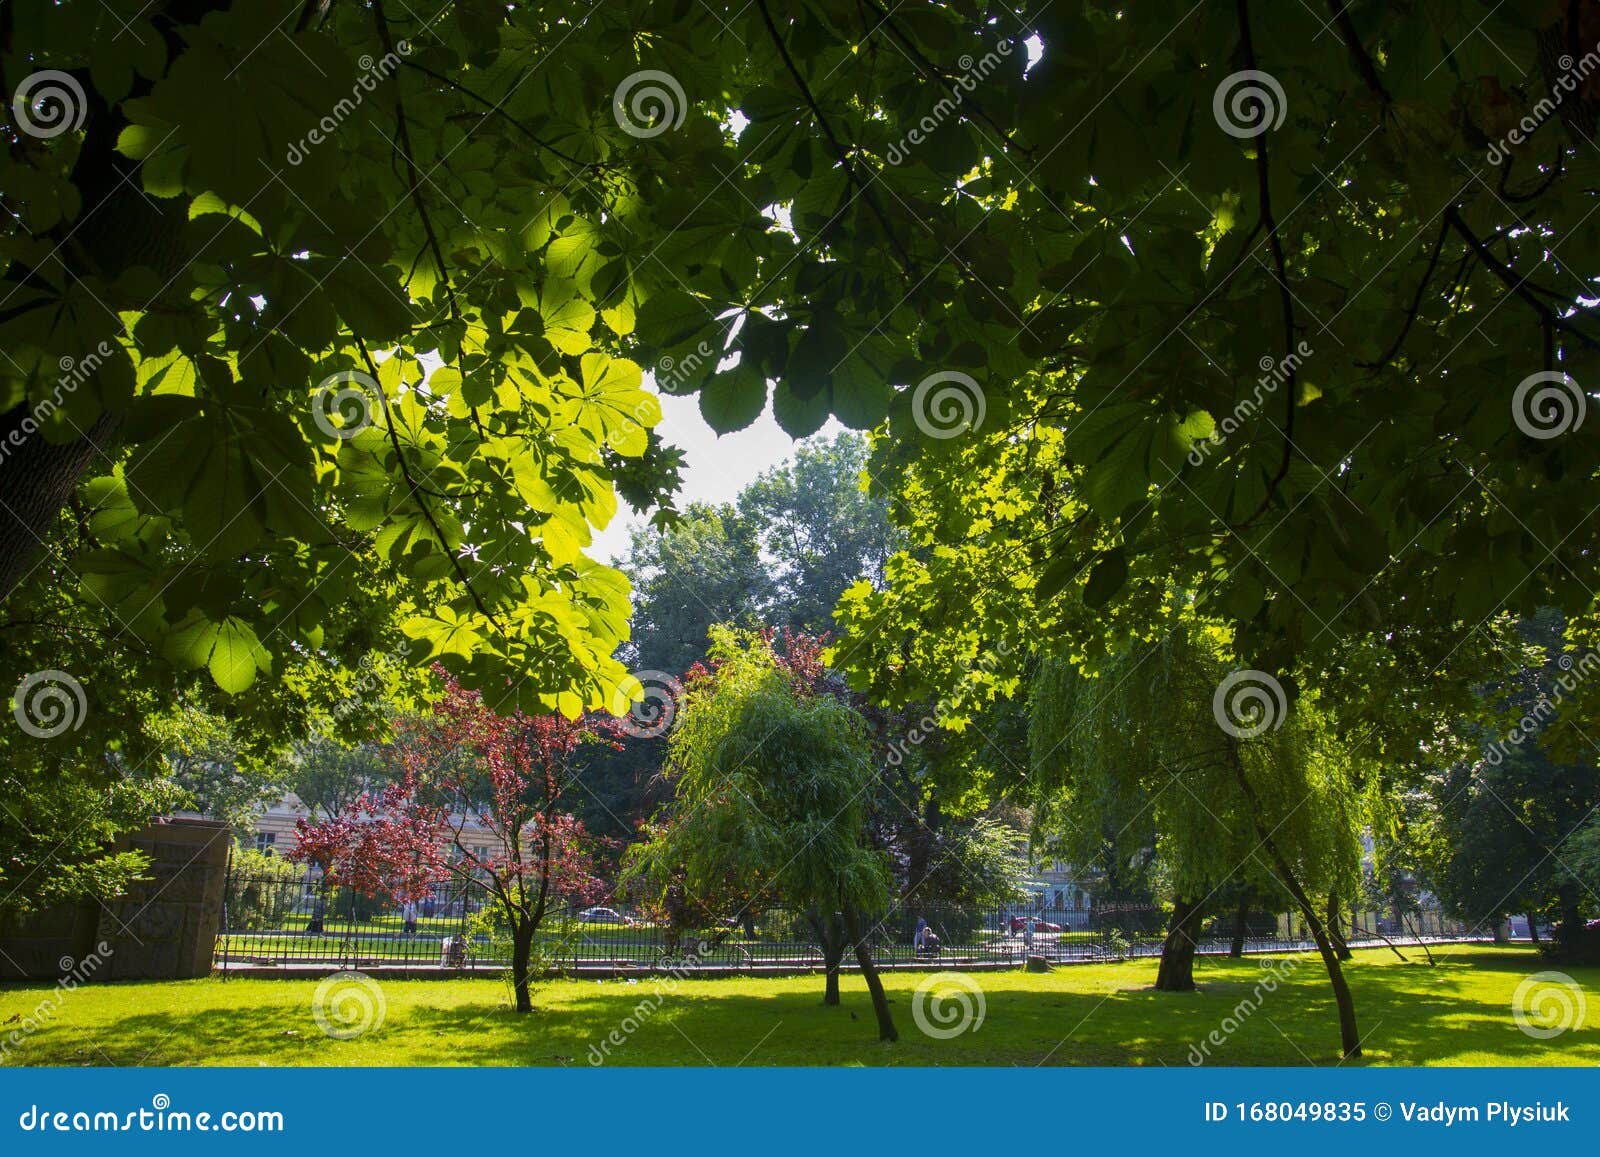 Beautiful Green Summer Park Outdoors. Blooming Trees and Emerald Grass